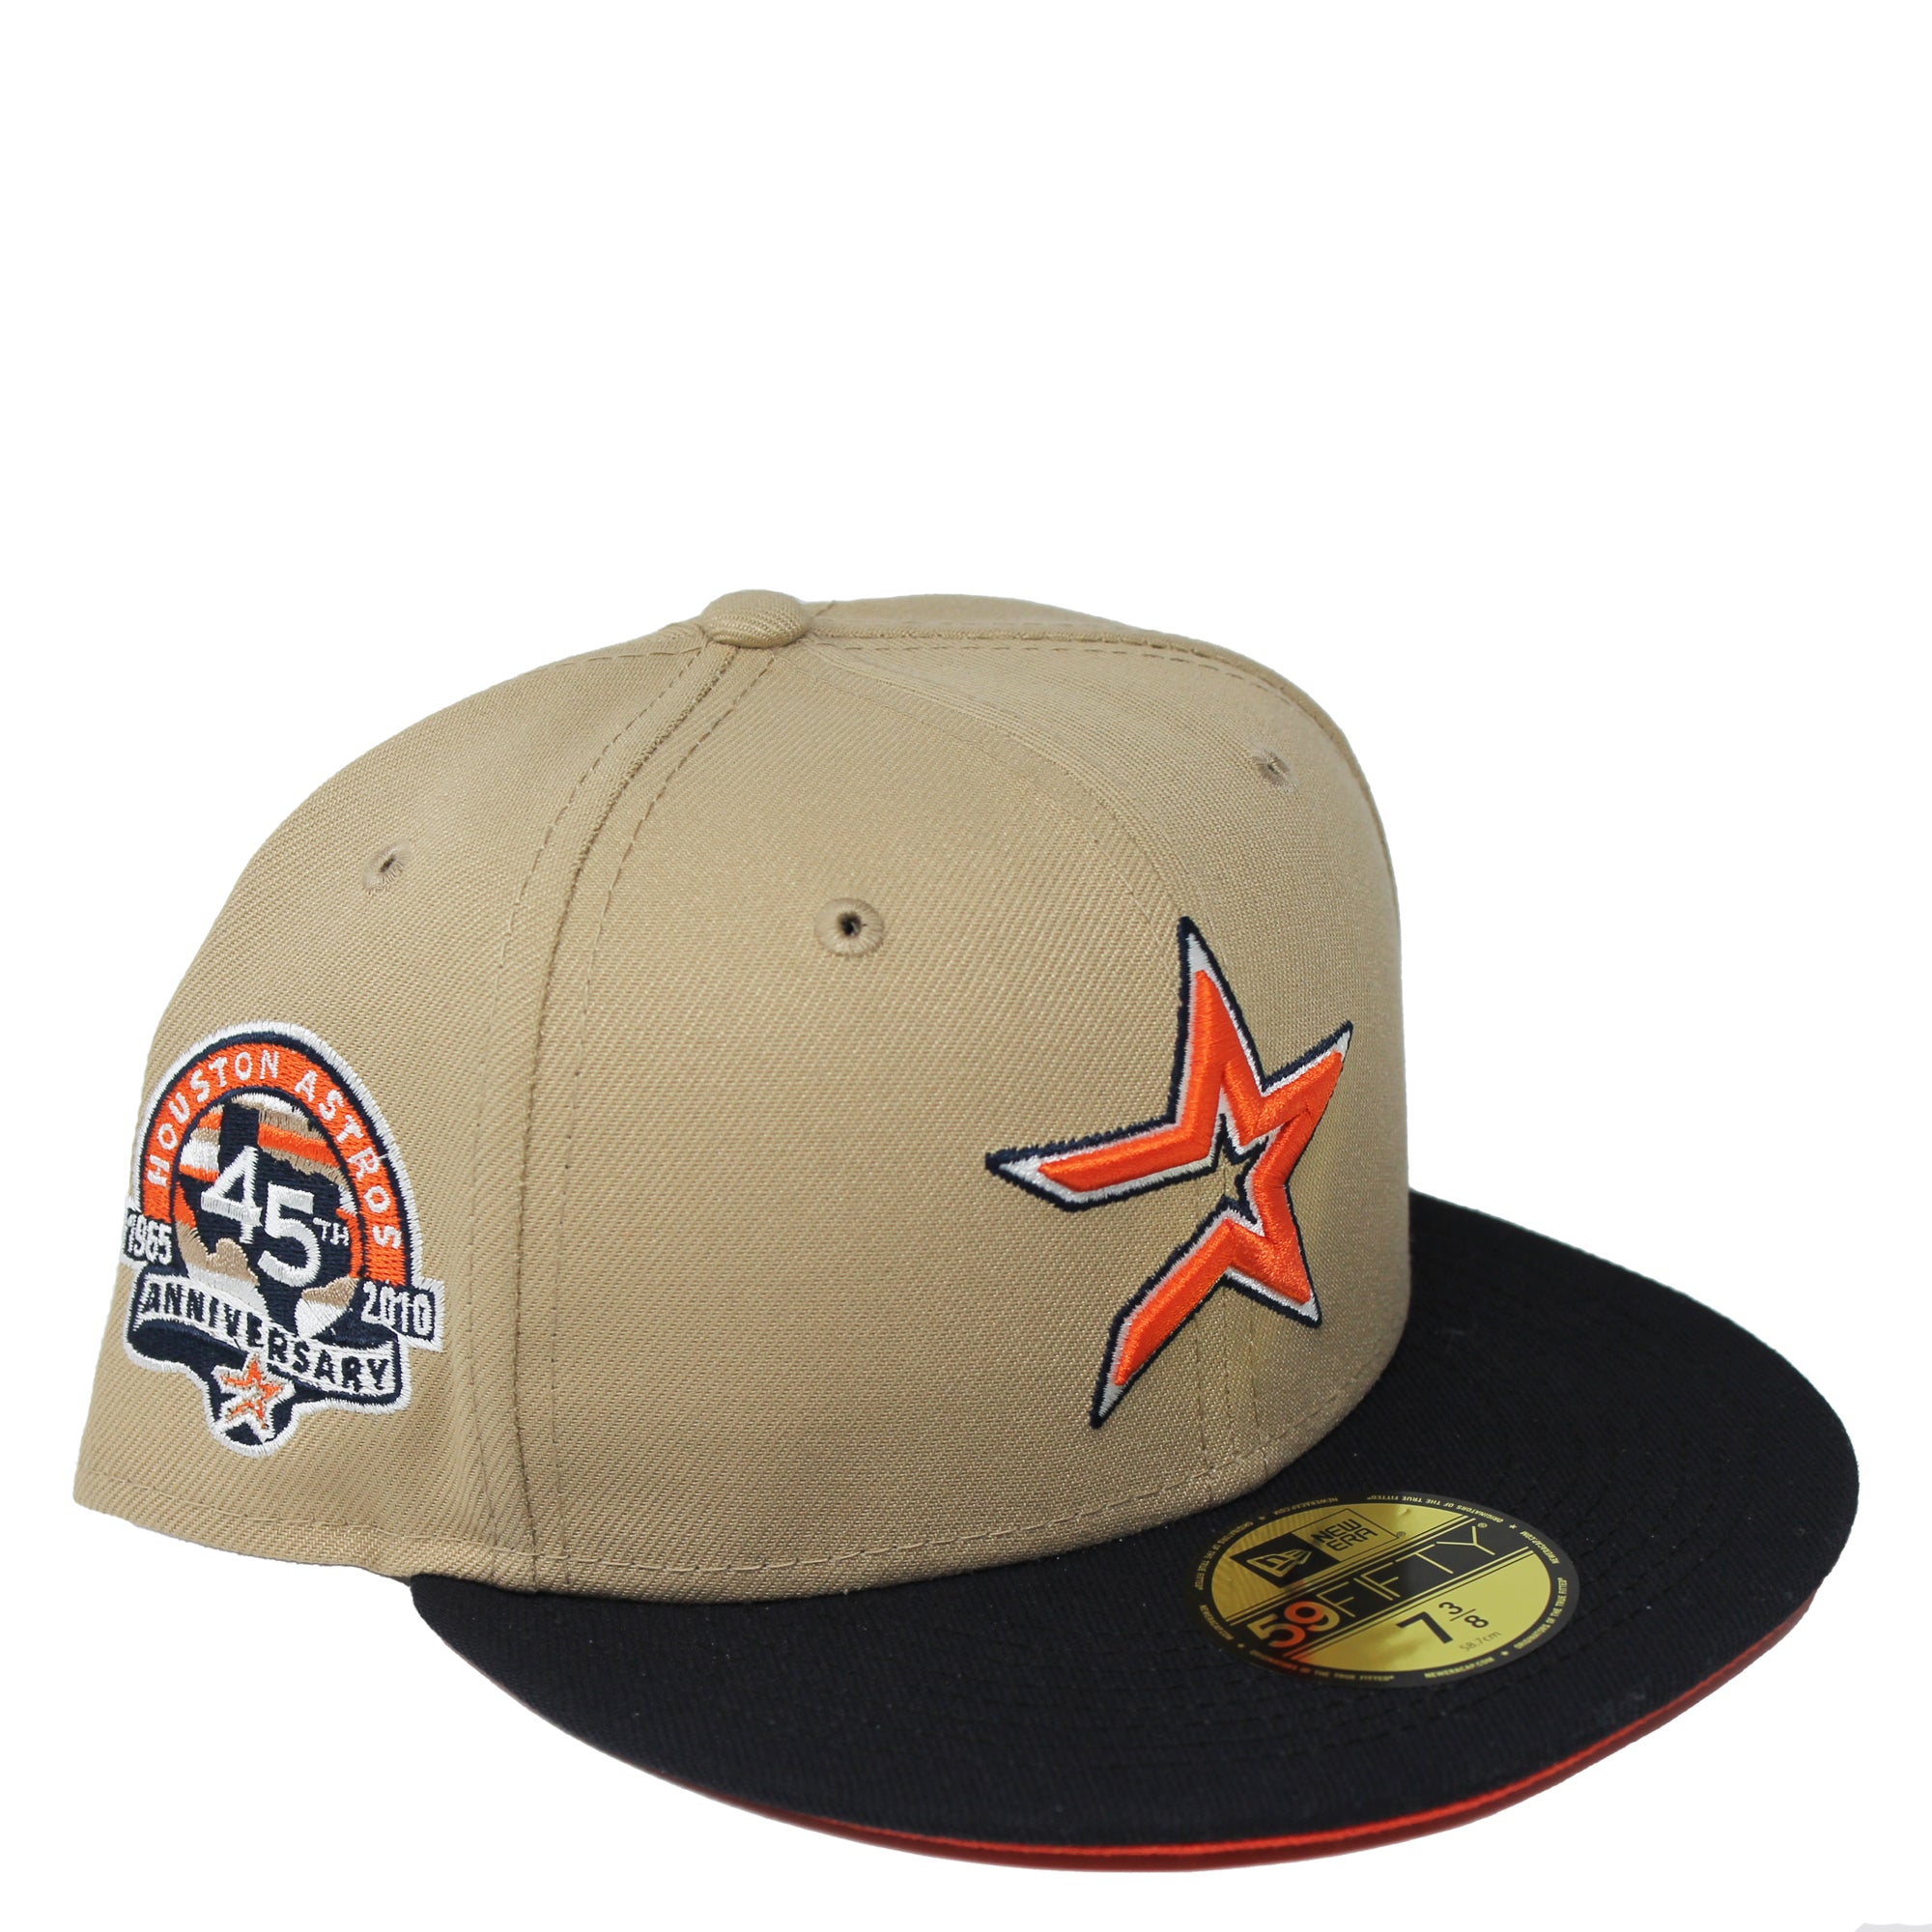 Houston Astros 45th Anniversary New Era 59Fifty Fitted Hat (Pinot